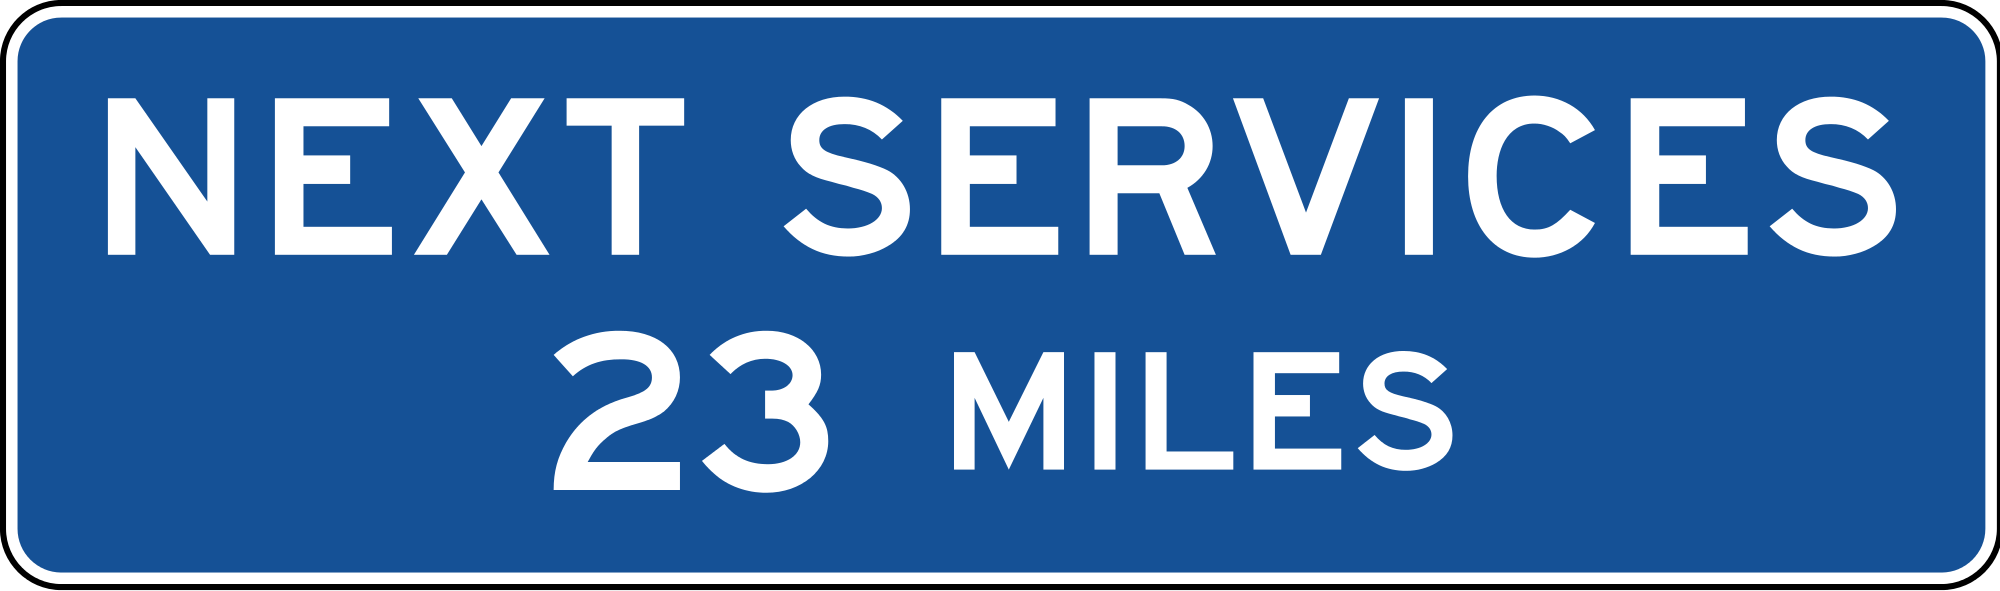 D9-17 Next Services XX Miles (English) Guide Sign